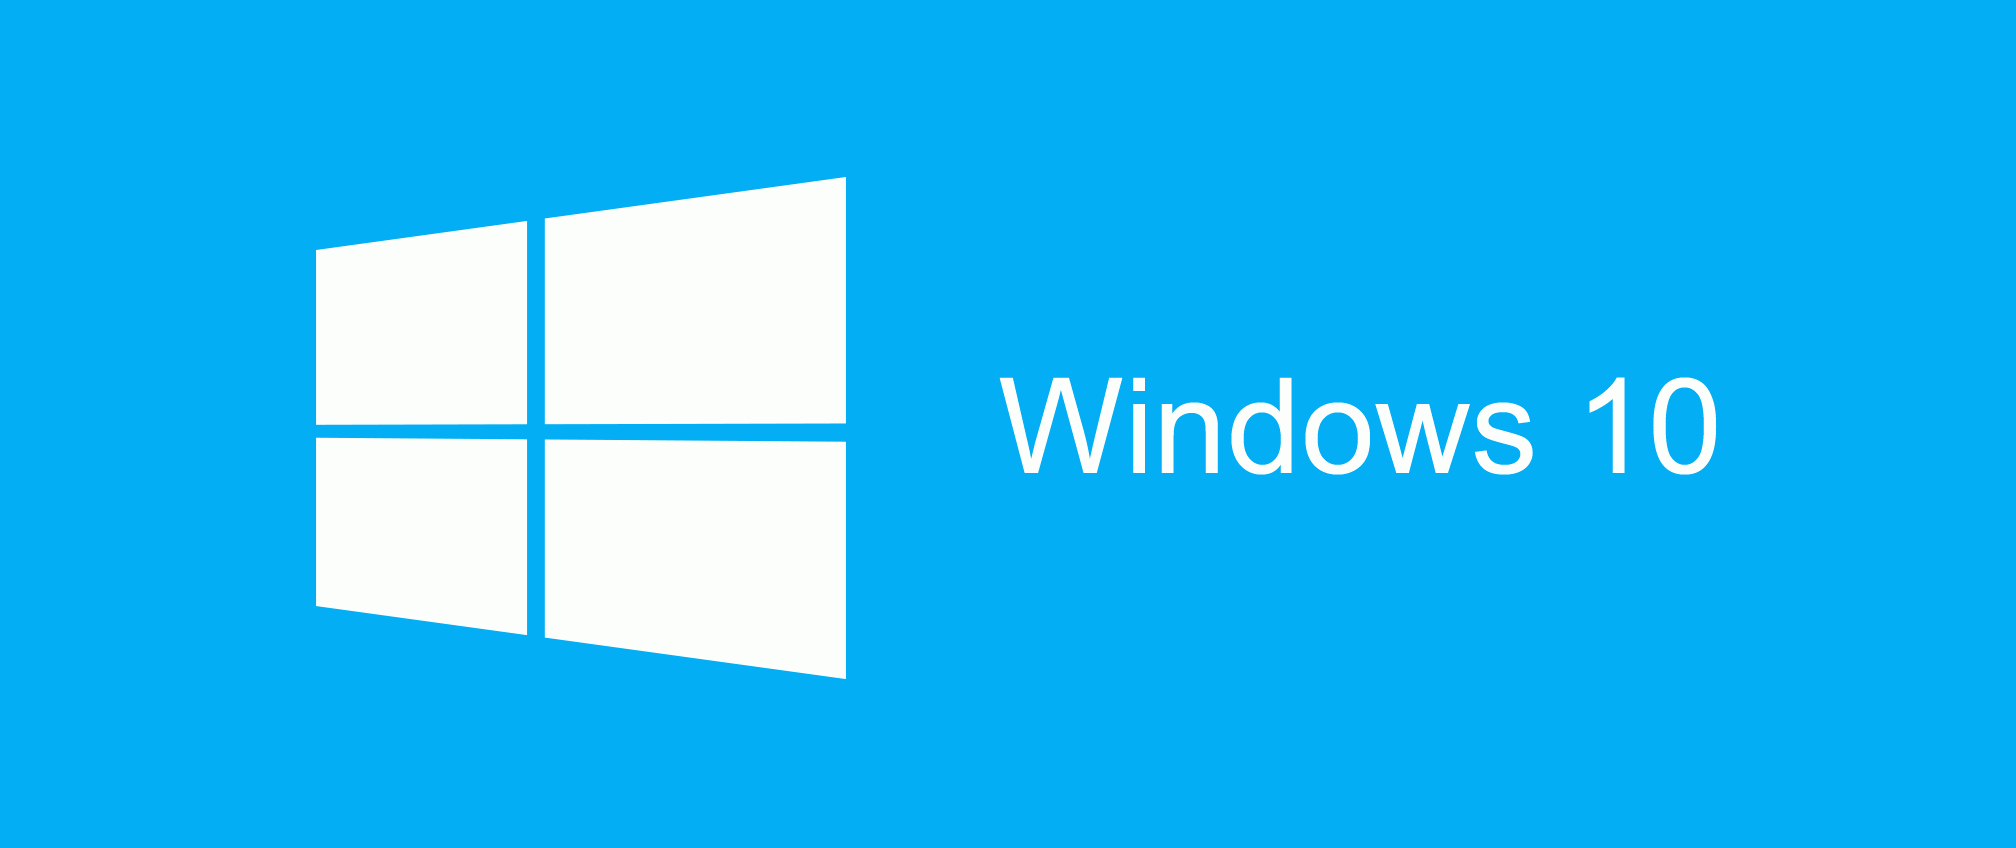 Microsoft Windows Logo - Why did Microsoft choose the logo of 4 colored squares in the shape